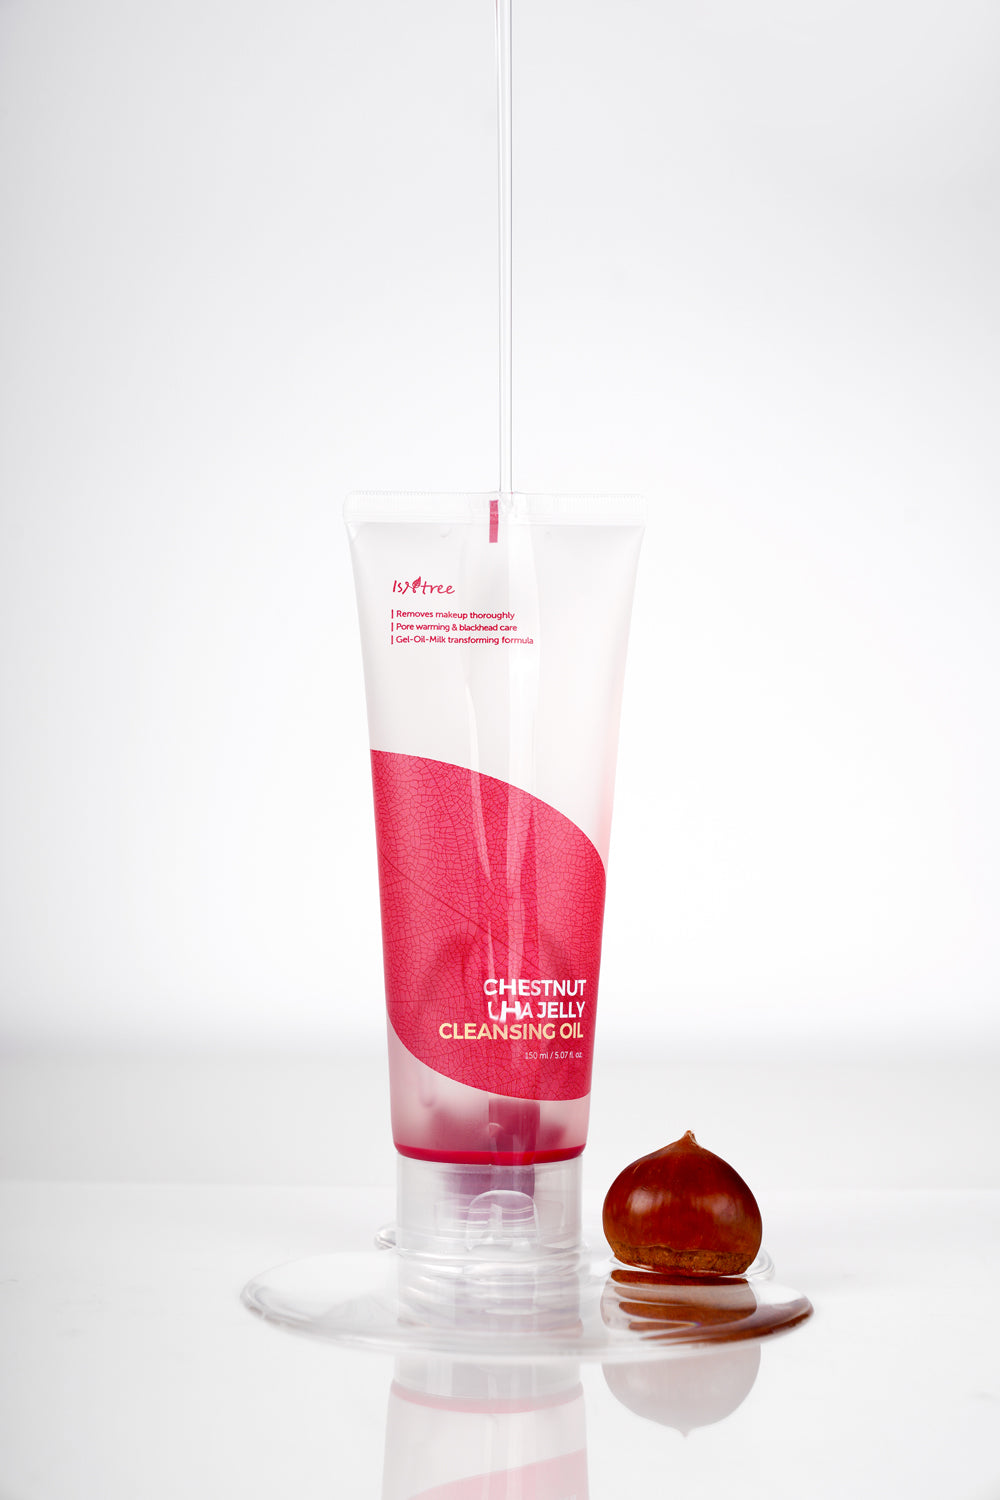 ISNTREE Chestnut LHA Jelly Cleansing Oil 150mL